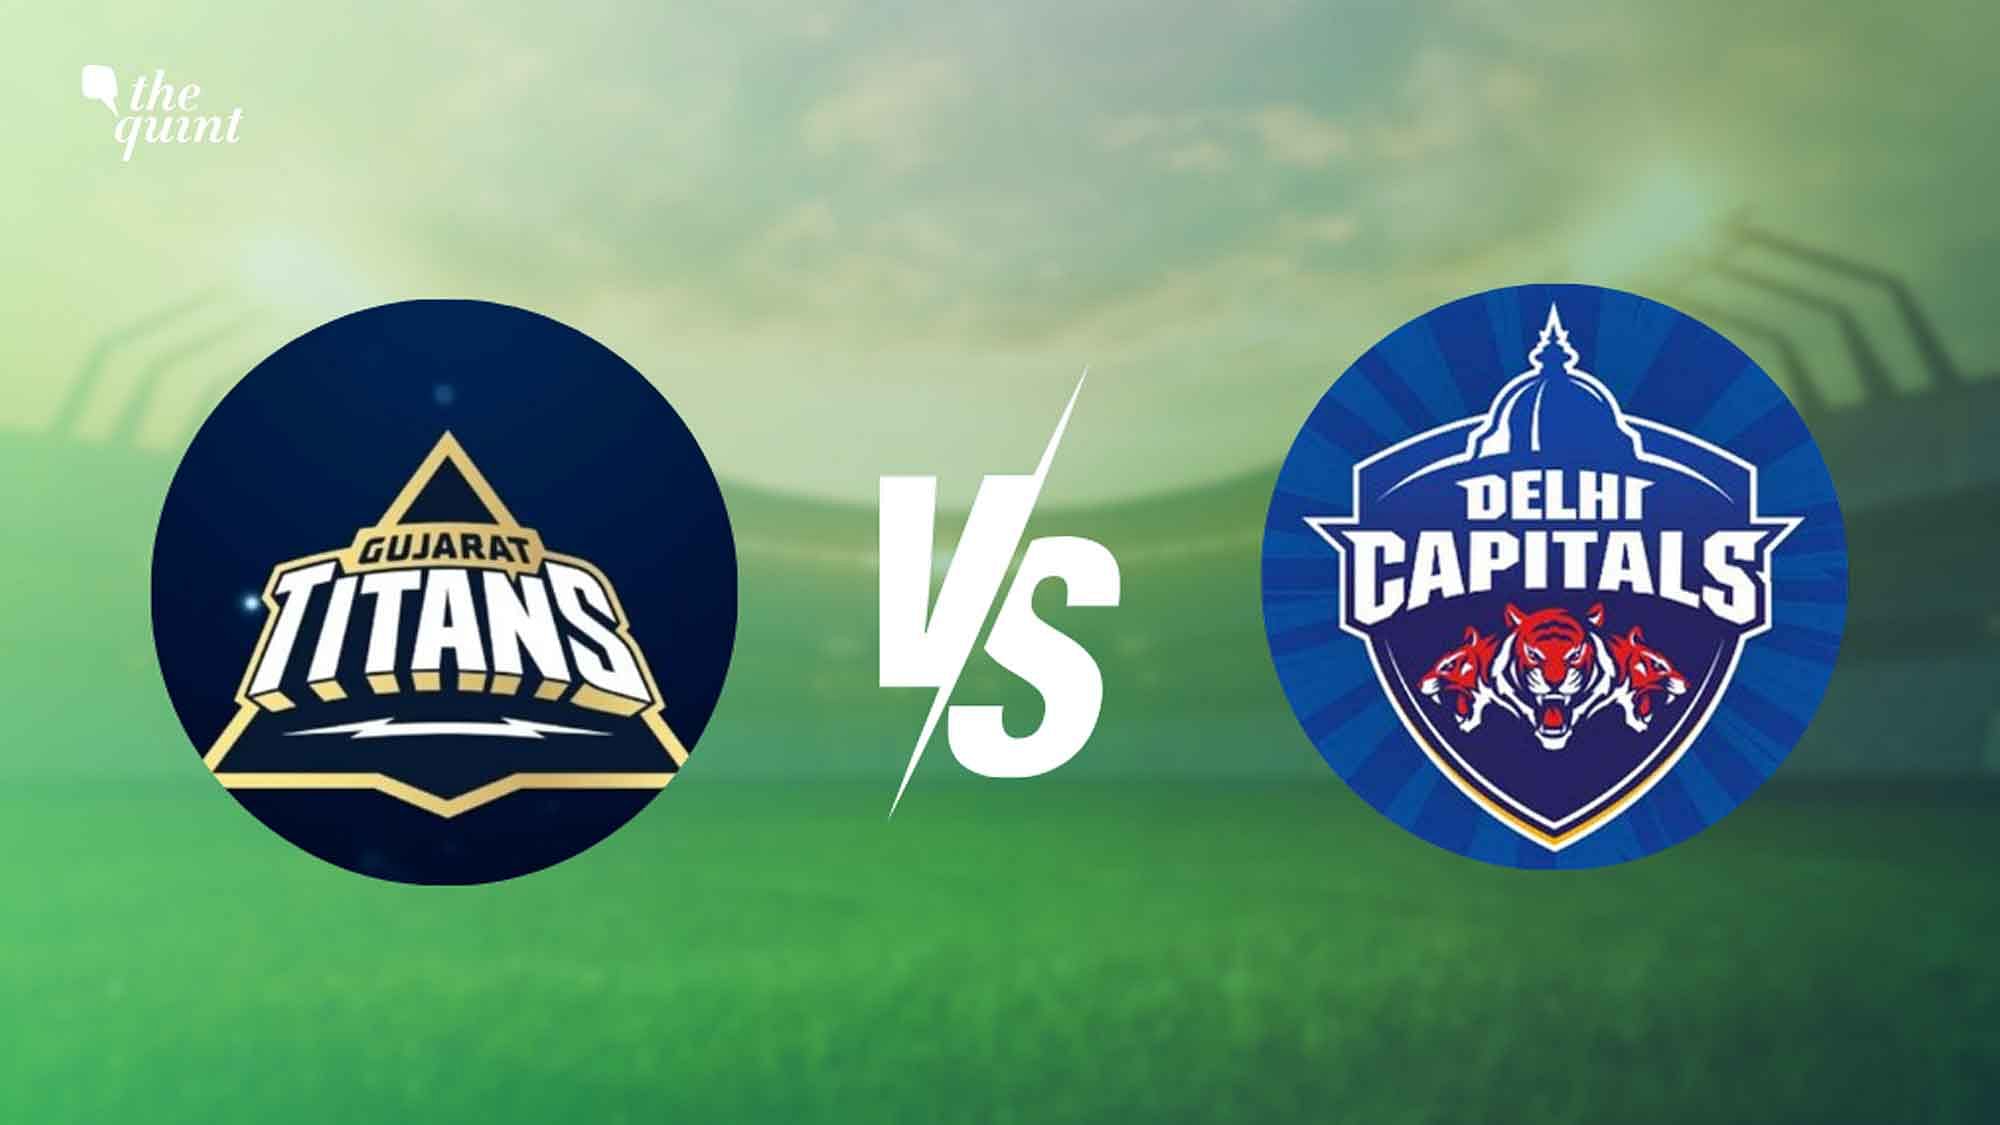 GT vs DC, IPL Match Today: Live Streaming, Head To Head, Playing 11 & Prediction